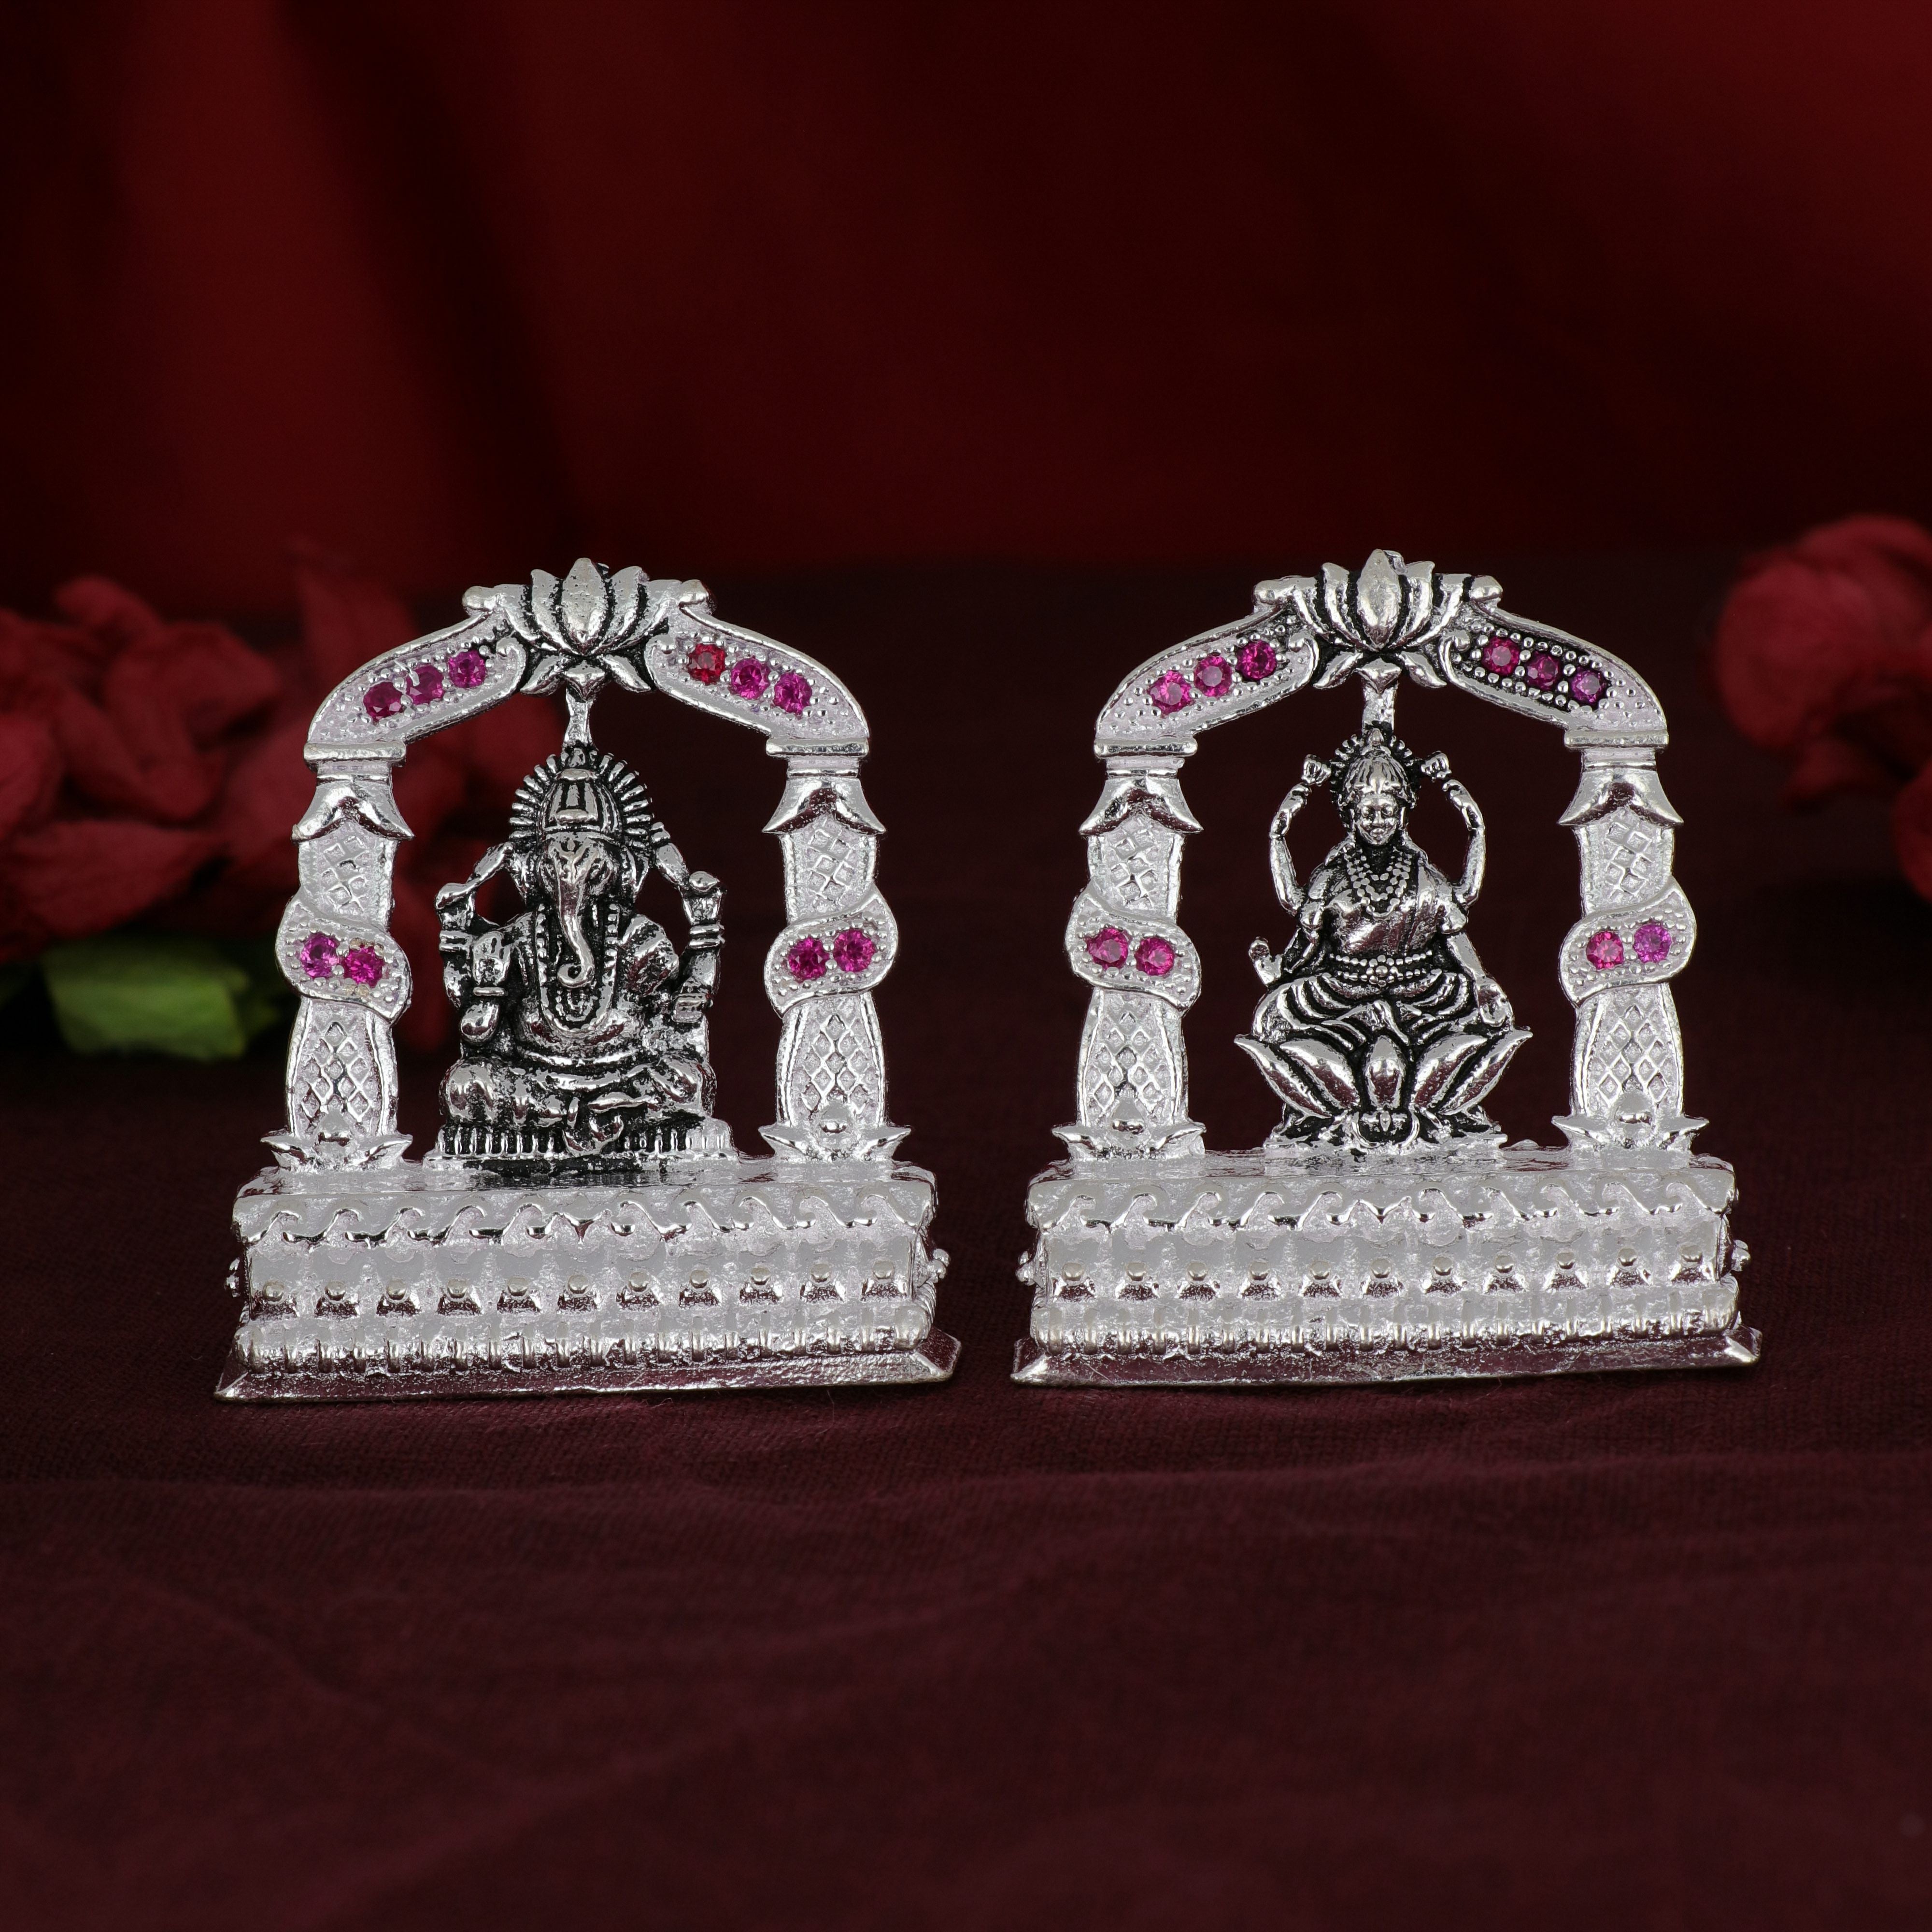 Shri Ganesh Laxmiji Micro Silver Murti Collection, adorned with delicate pink stones